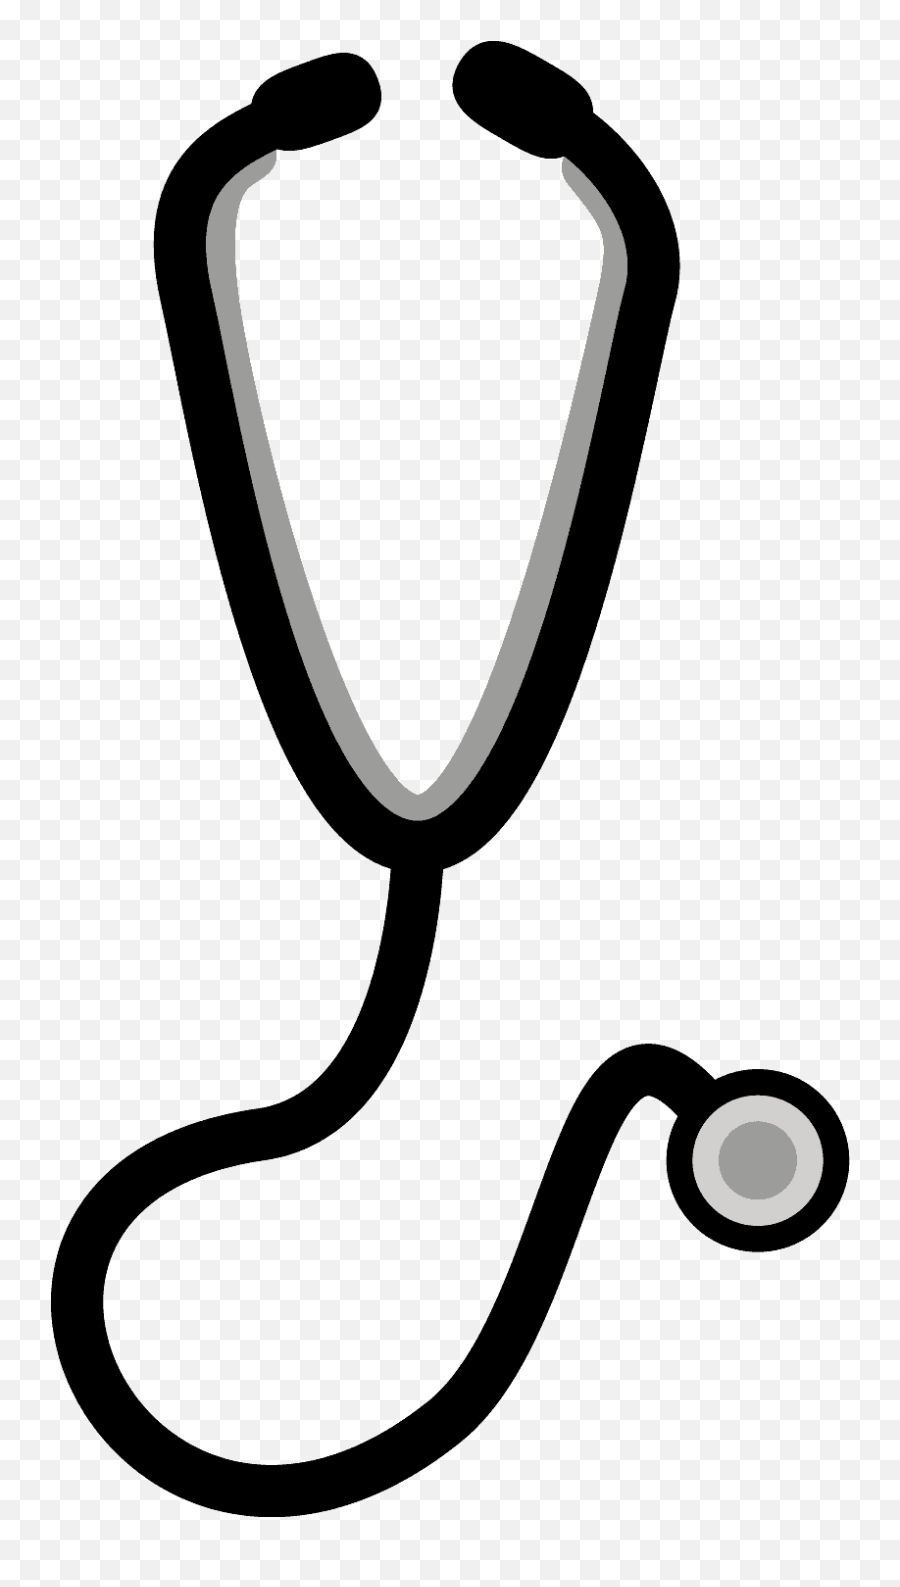 Stethoscope Emoji Clipart Free Download Transparent Png - Stethoscope Emoji,Stethoscope Clipart Black And White